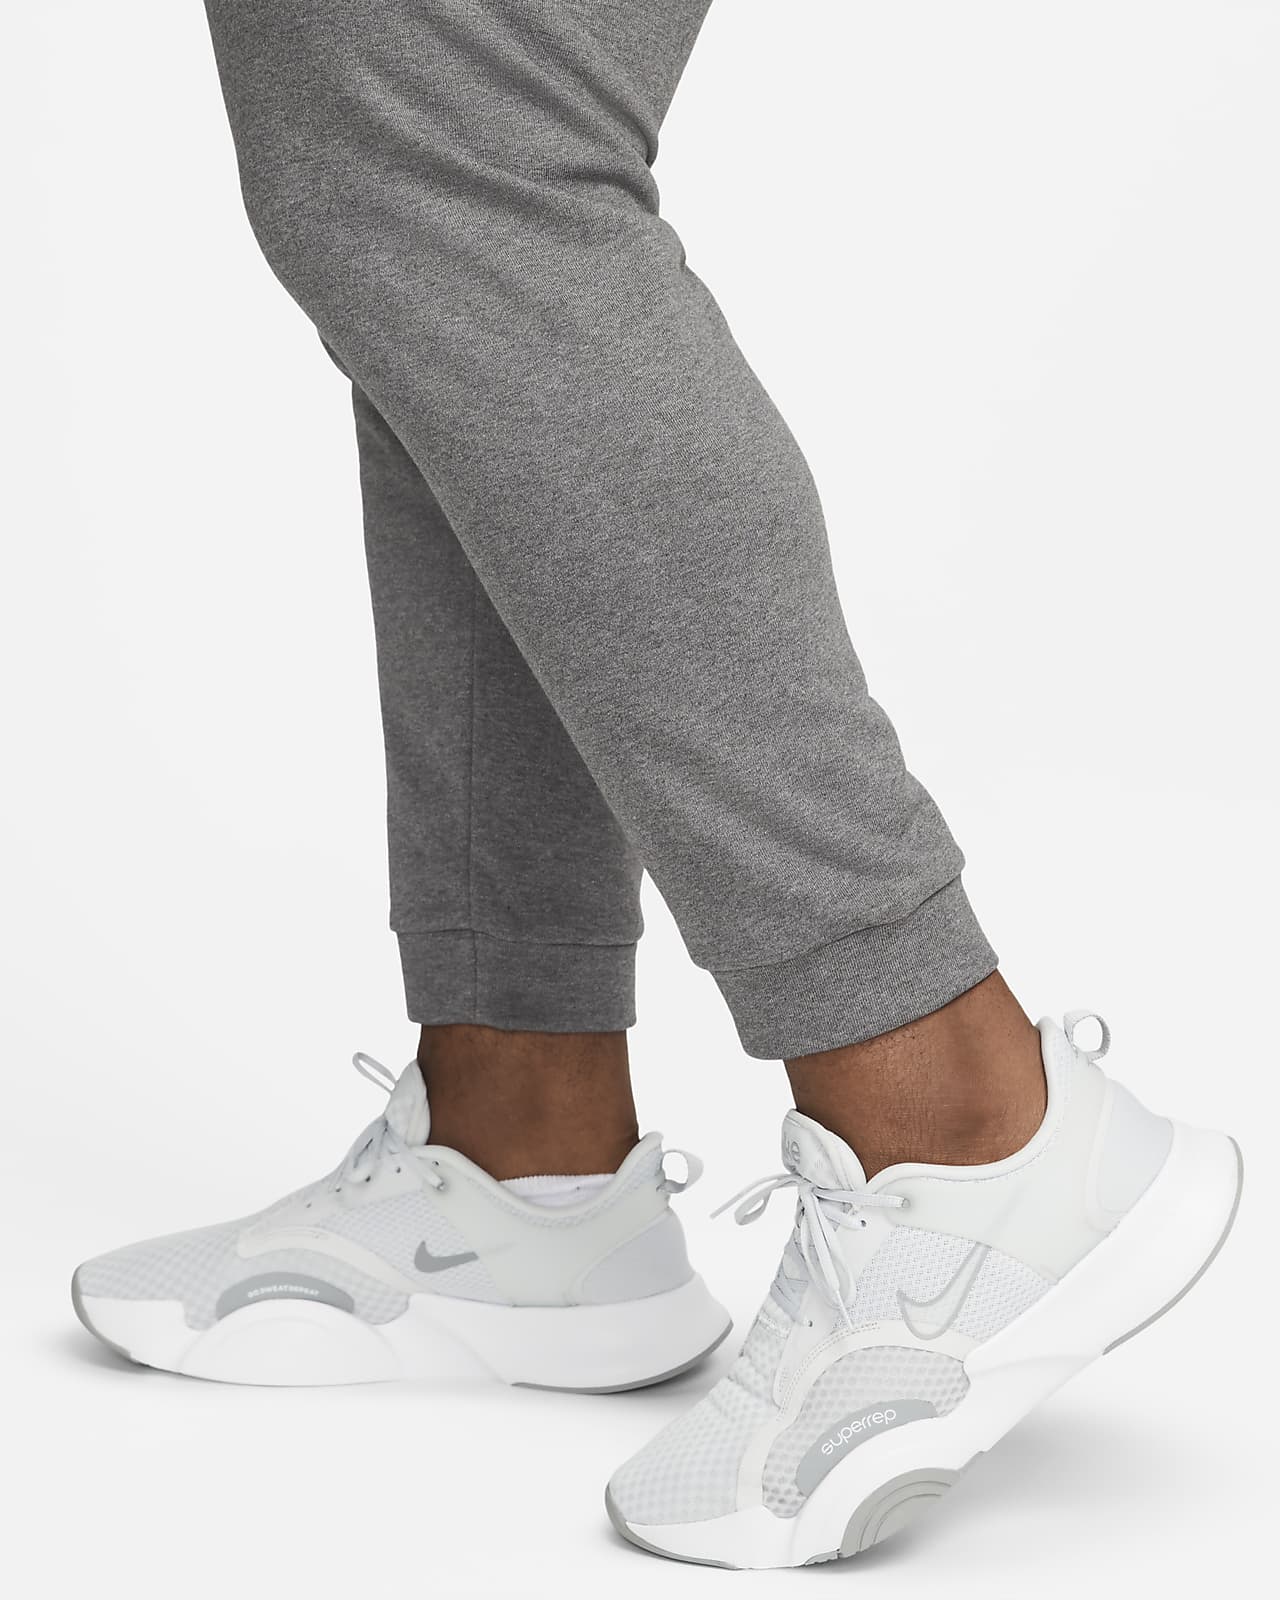 Nike Therma-FIT Men's Tapered Training Trousers. Nike AU